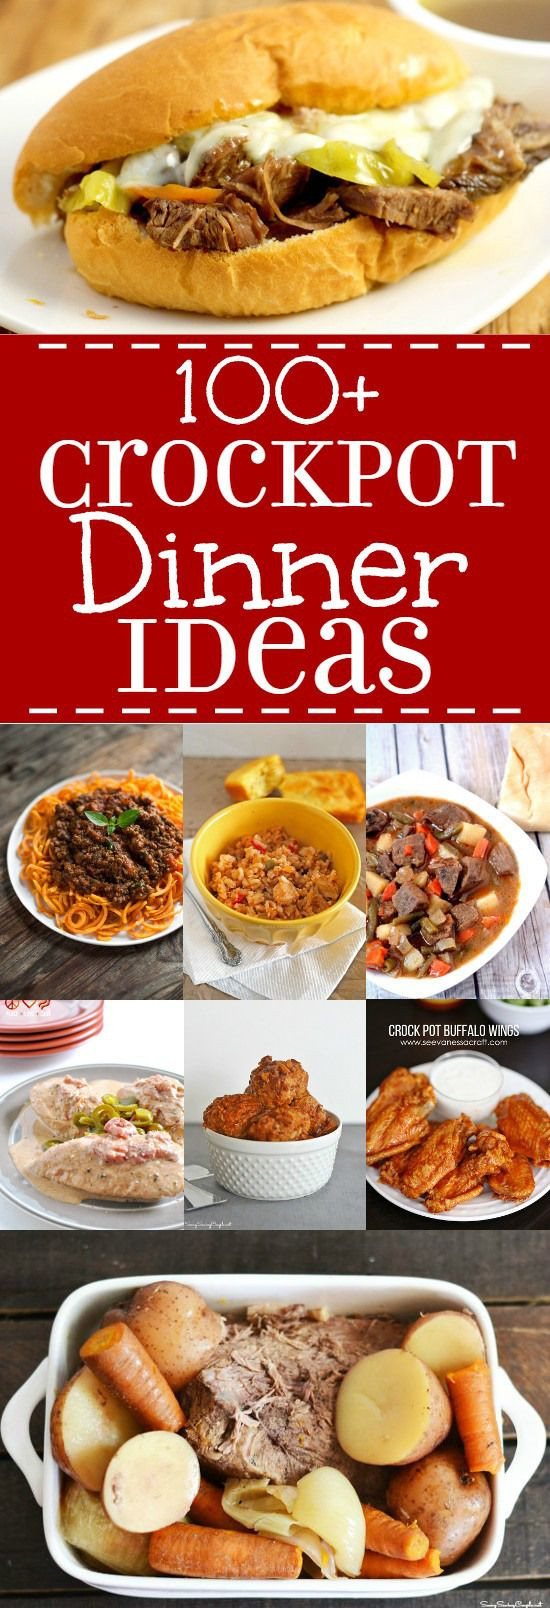 Easy Crockpot Dinners
 Over 100 easy and delicious Crock Pot Dinner Ideas with